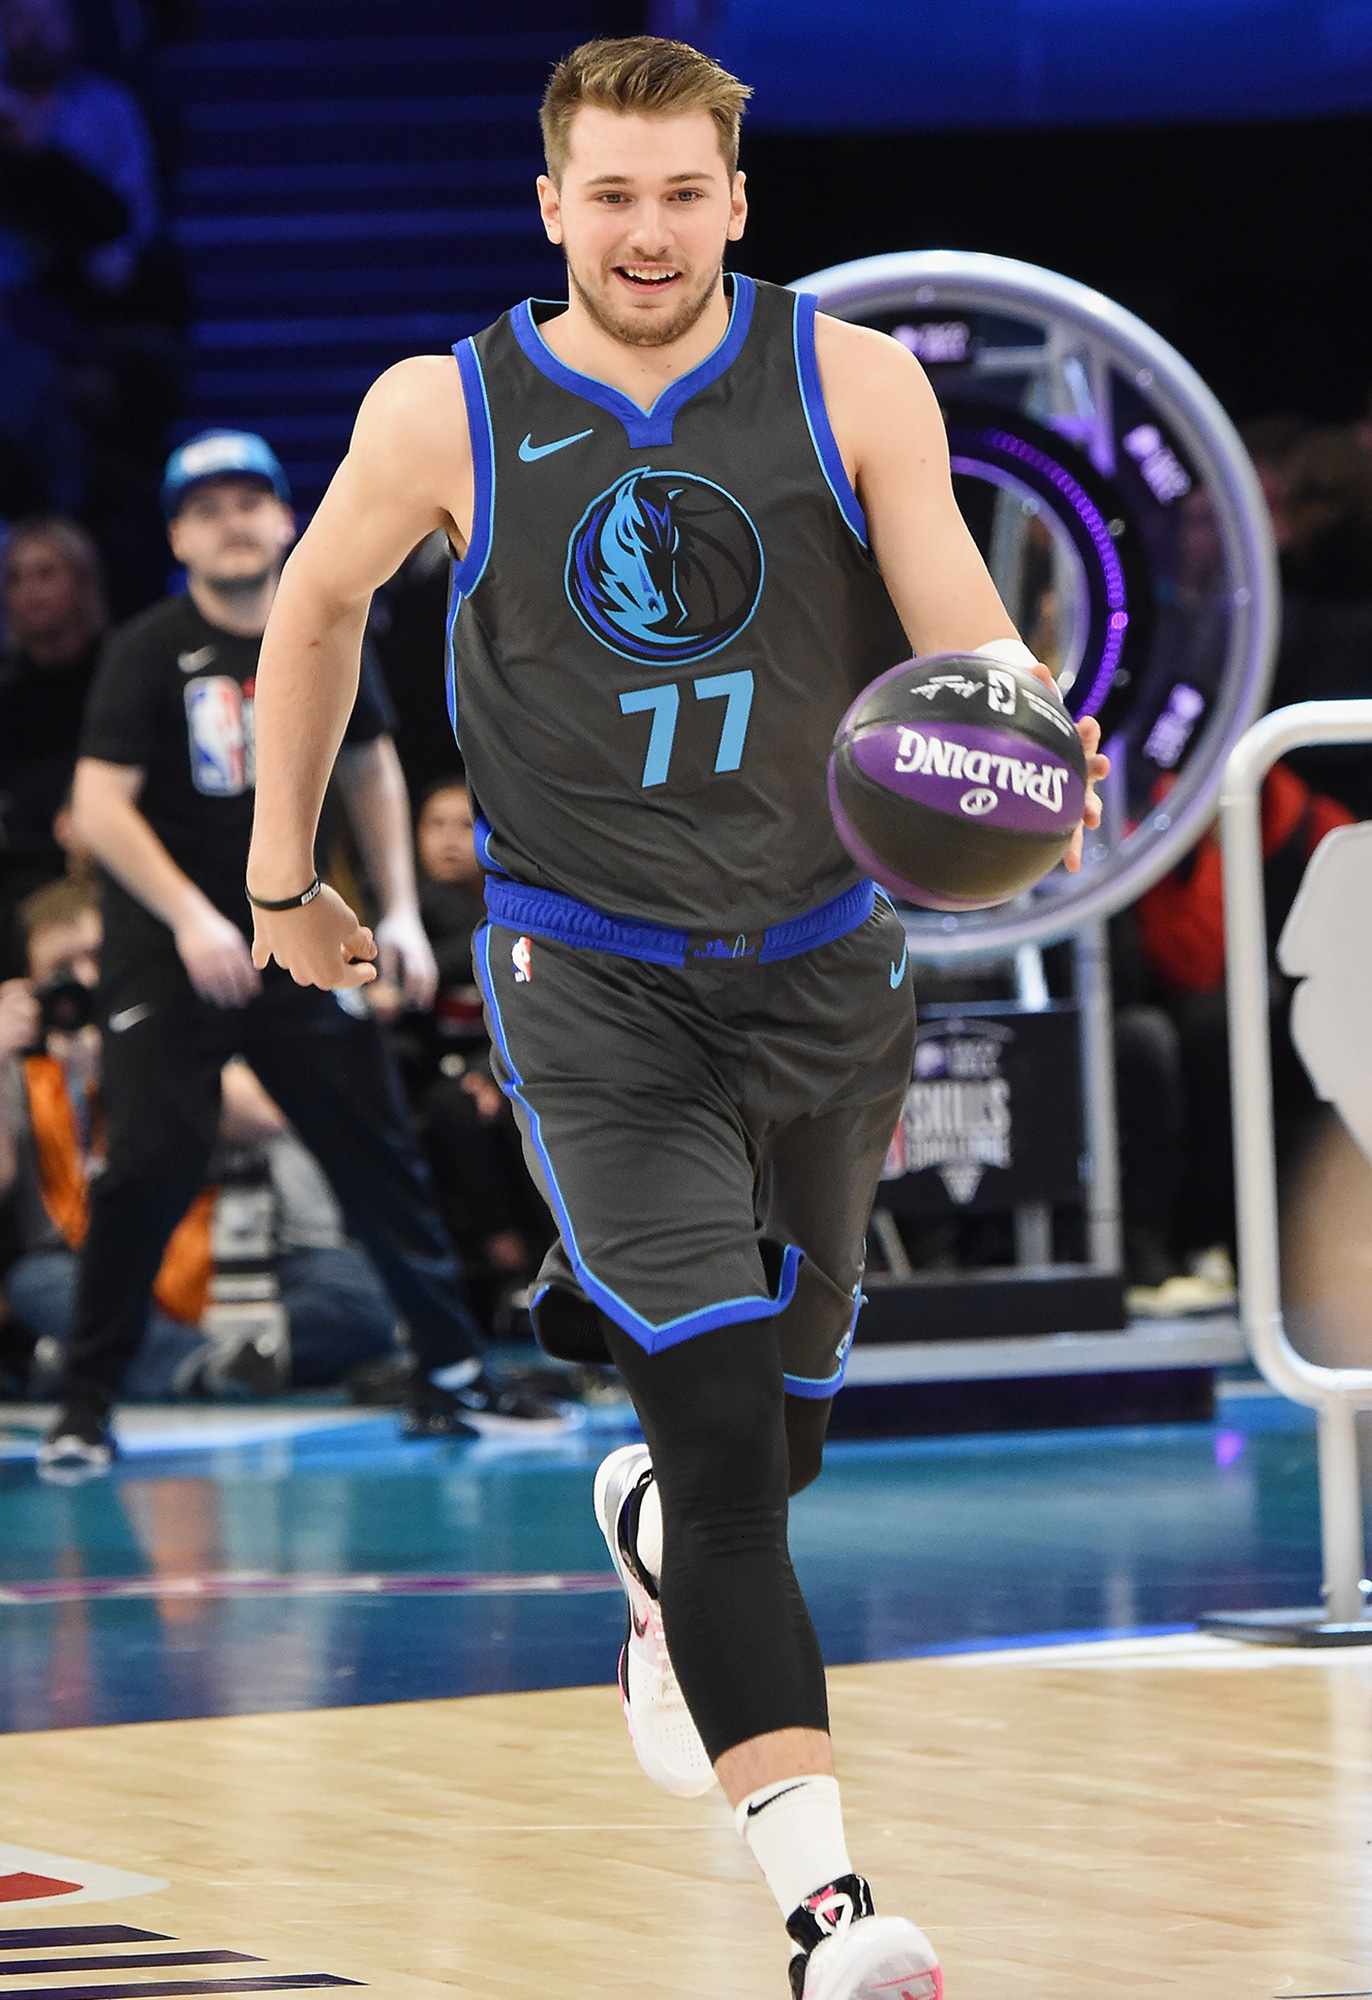 Luka Doncic participates in the Taco Bell Skills Challenge during the 2019 State Farm All-Star Saturday Night on February 16, 2019 in Charlotte, North Carolina. 